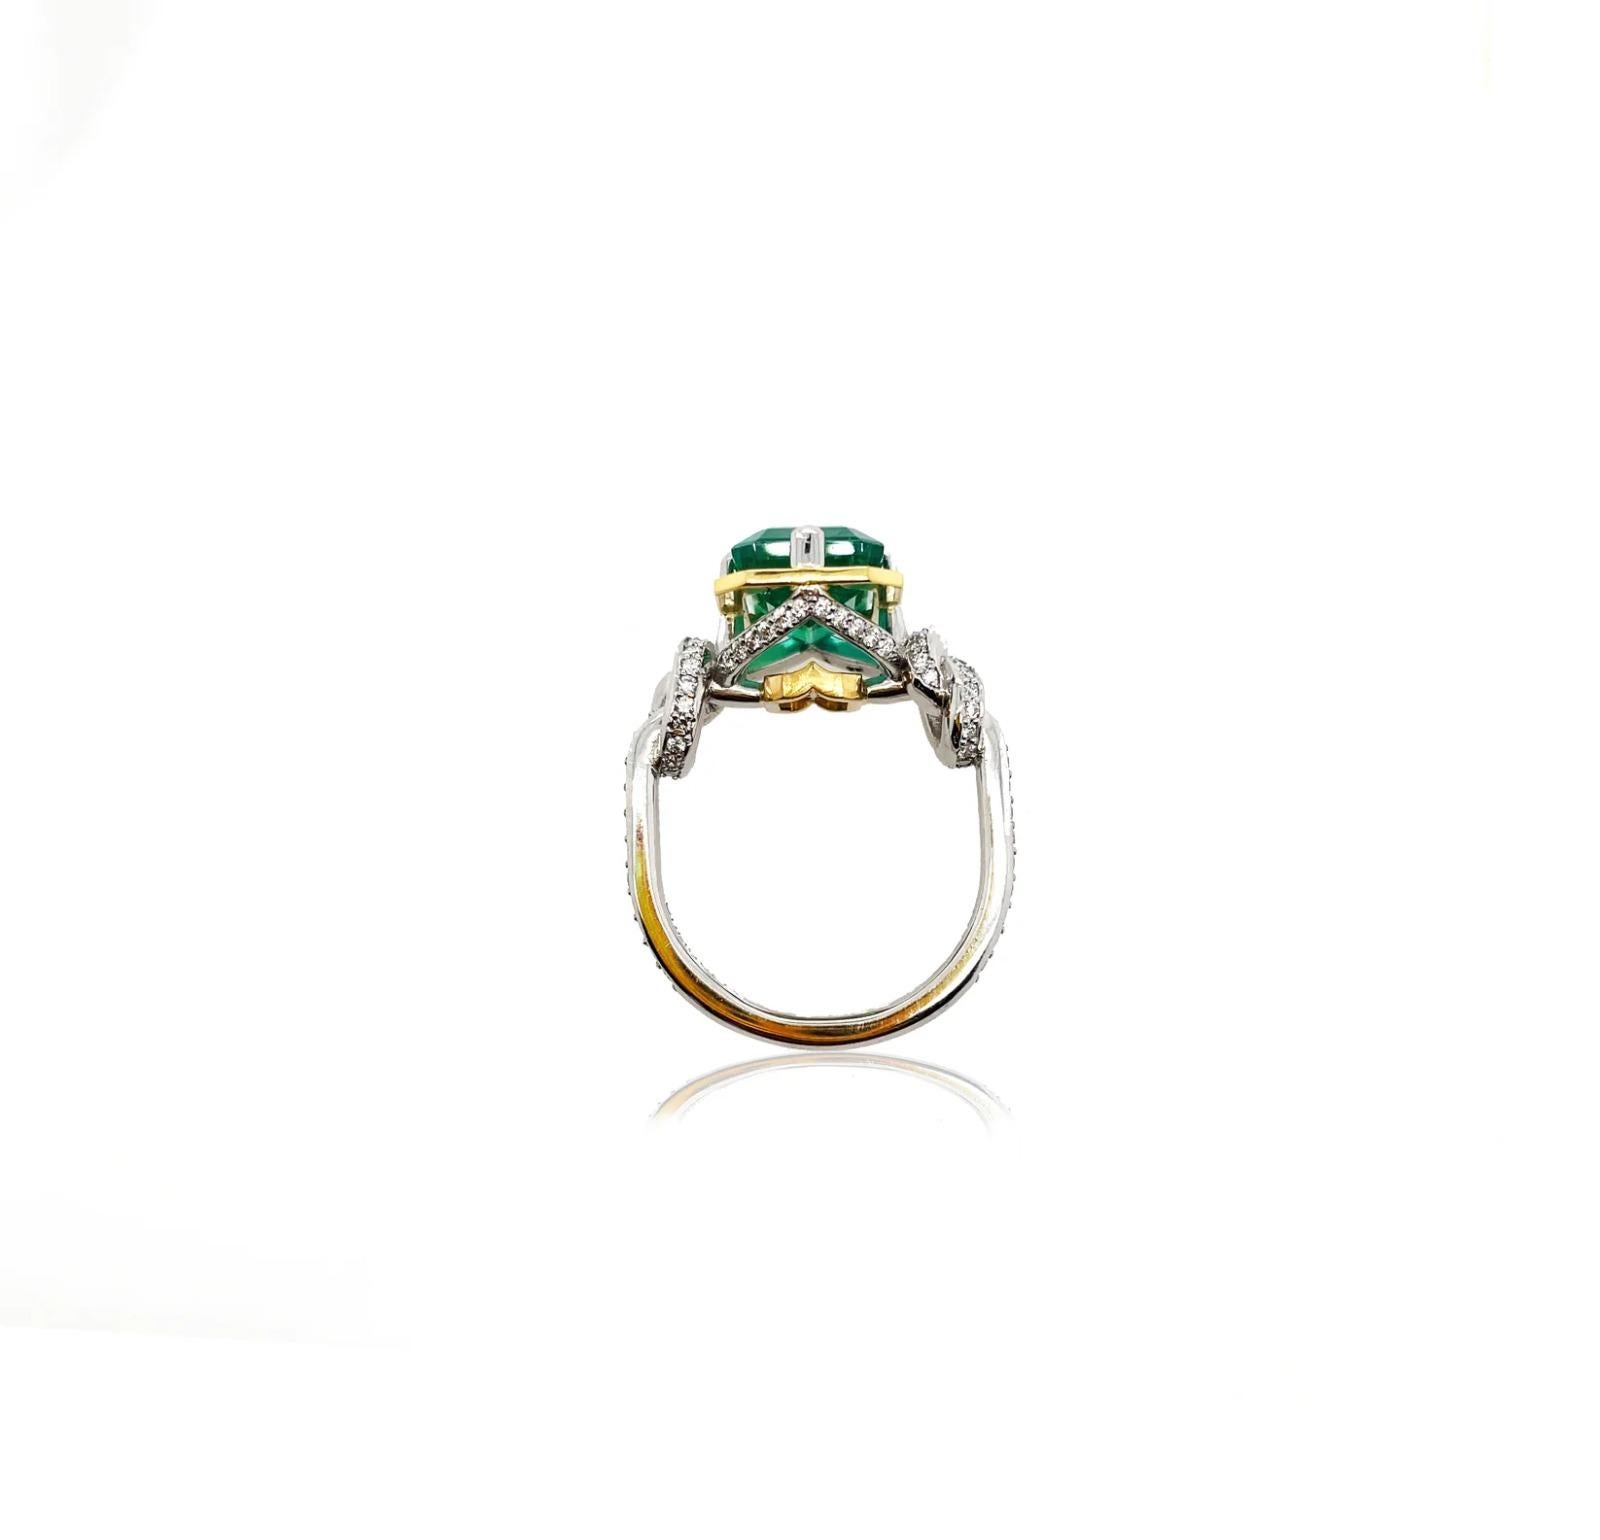 Glamorously bold and unabashedly seductive. This showstopper ring features an intense natural emerald cut Emerald poised between sharp eagle style talons and embraced by powerful-platinum, diamond encrusted ropes, converging to two knots on either